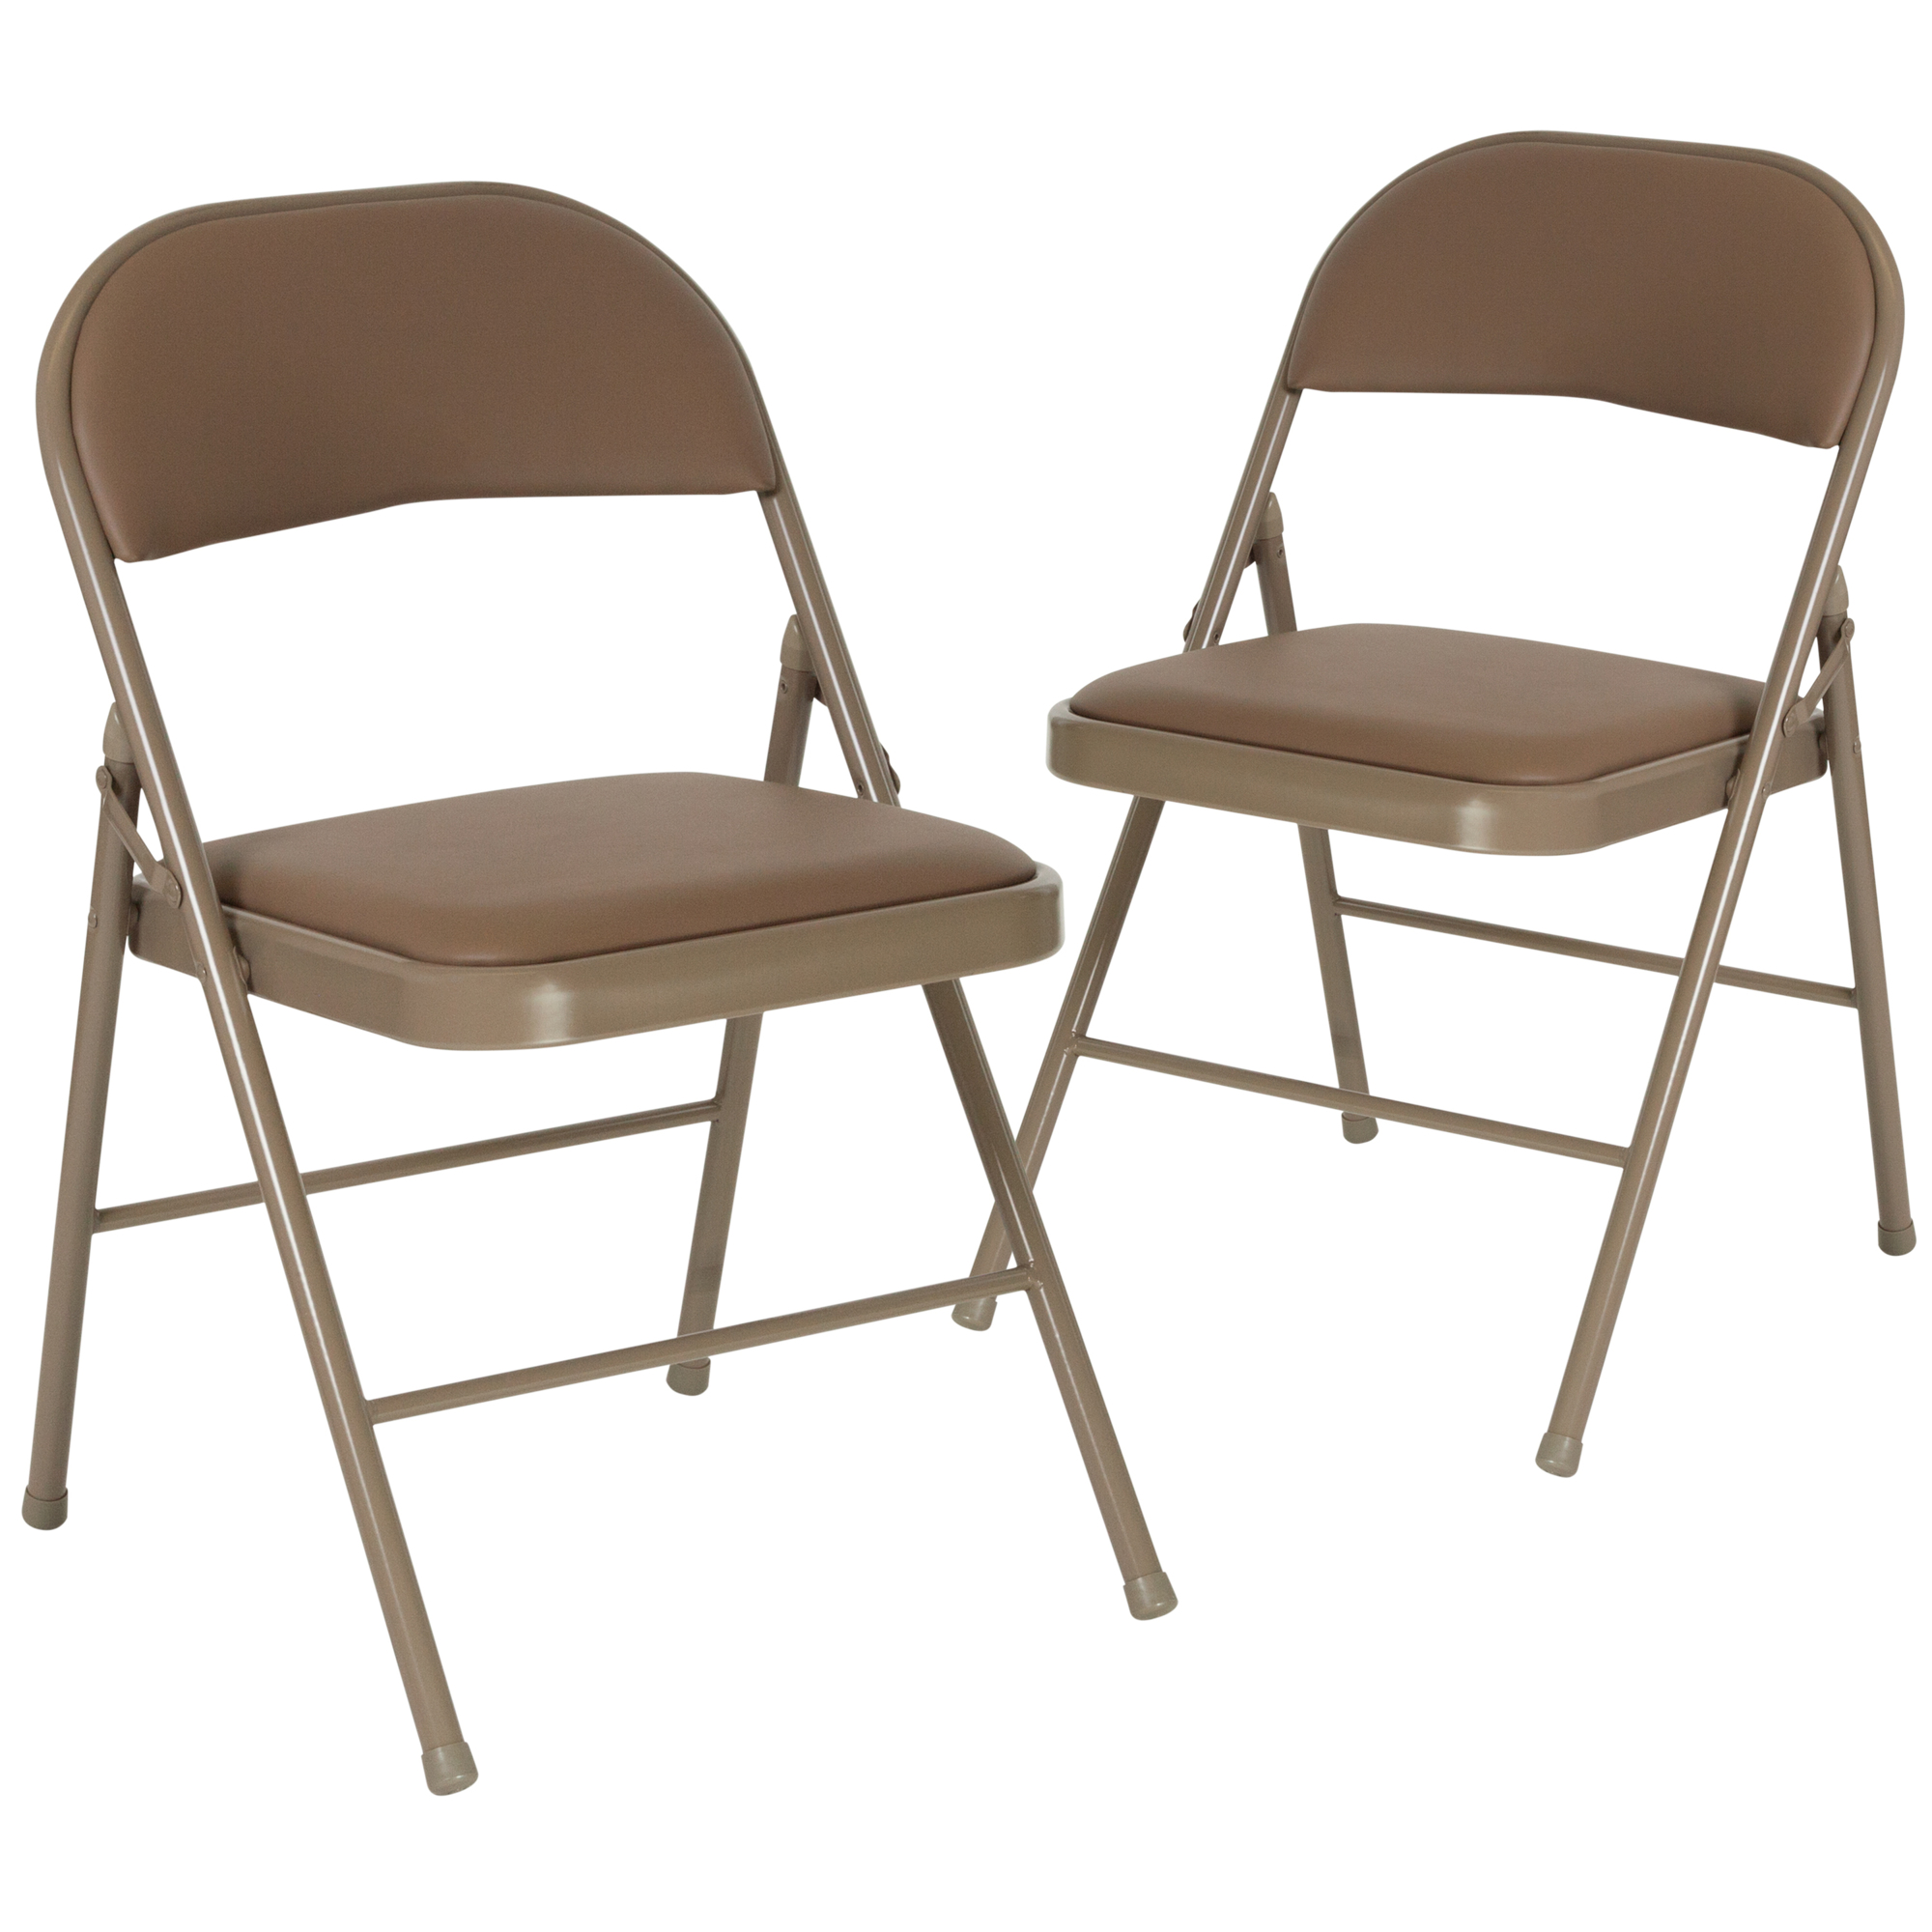 Flash Furniture, 2 Pack Double Braced Beige Vinyl Folding Chair, Primary Color Beige, Included (qty.) 2, Model 2HAF003DBGE